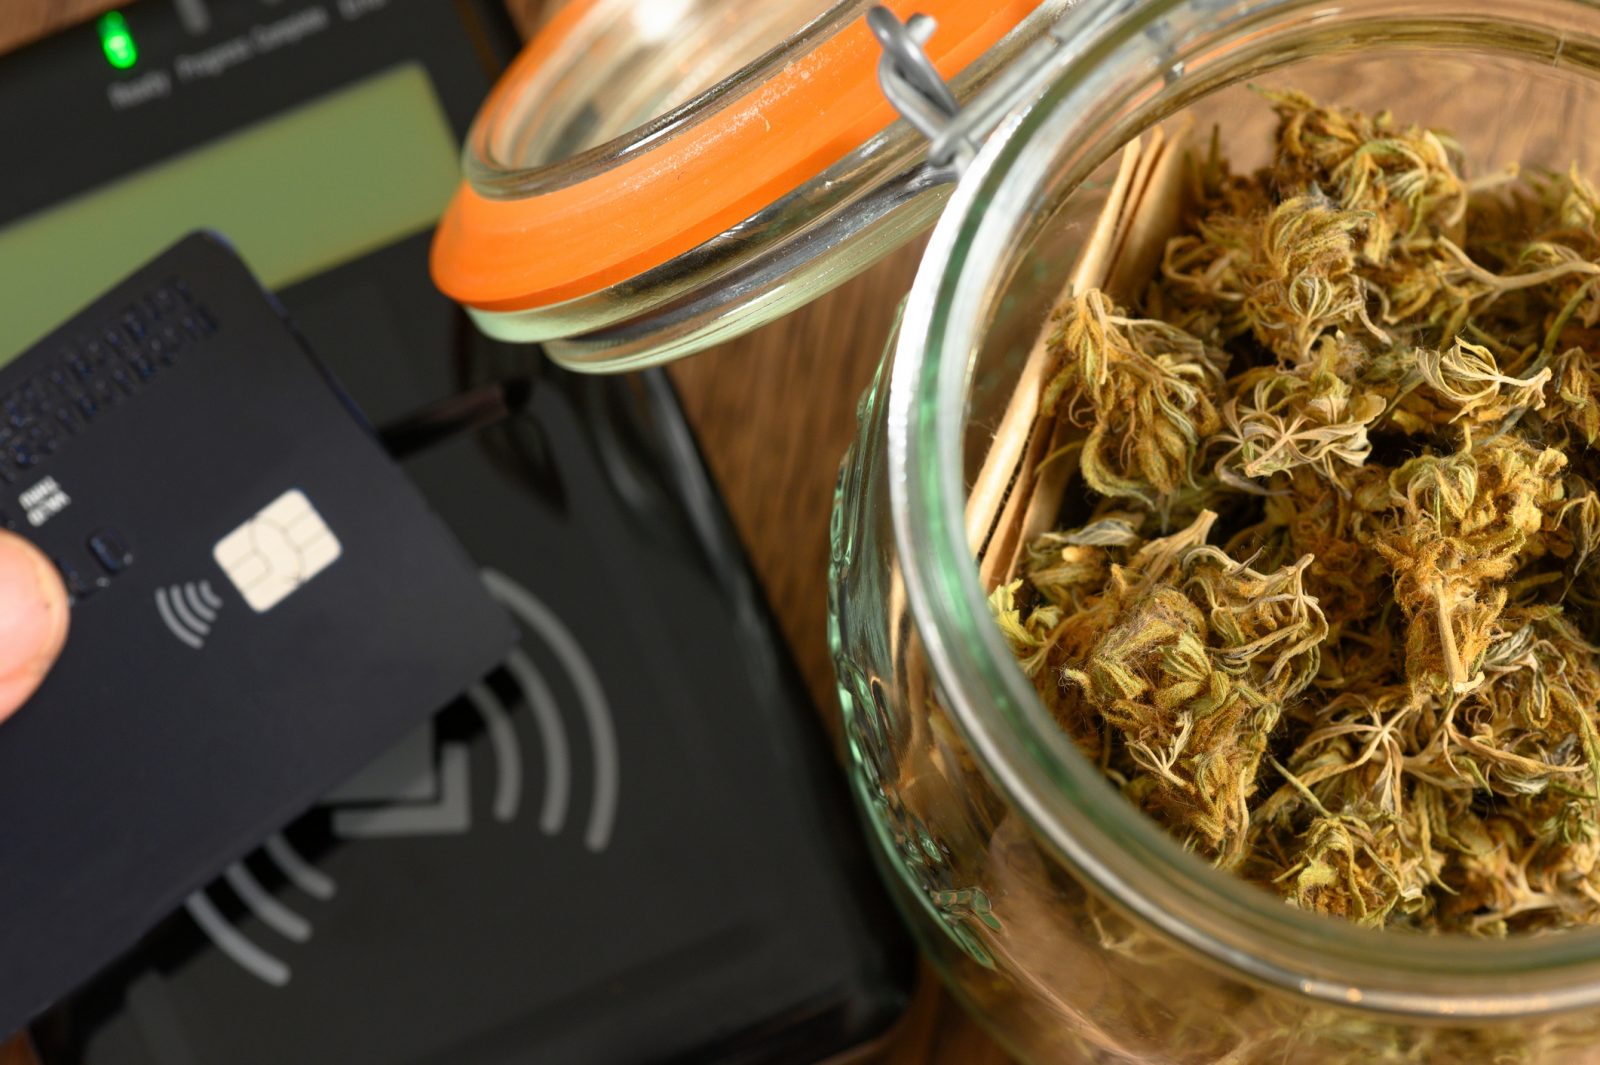 A hand taps a credit card over a contactless payment system beside a glass jar filled with cannabis.